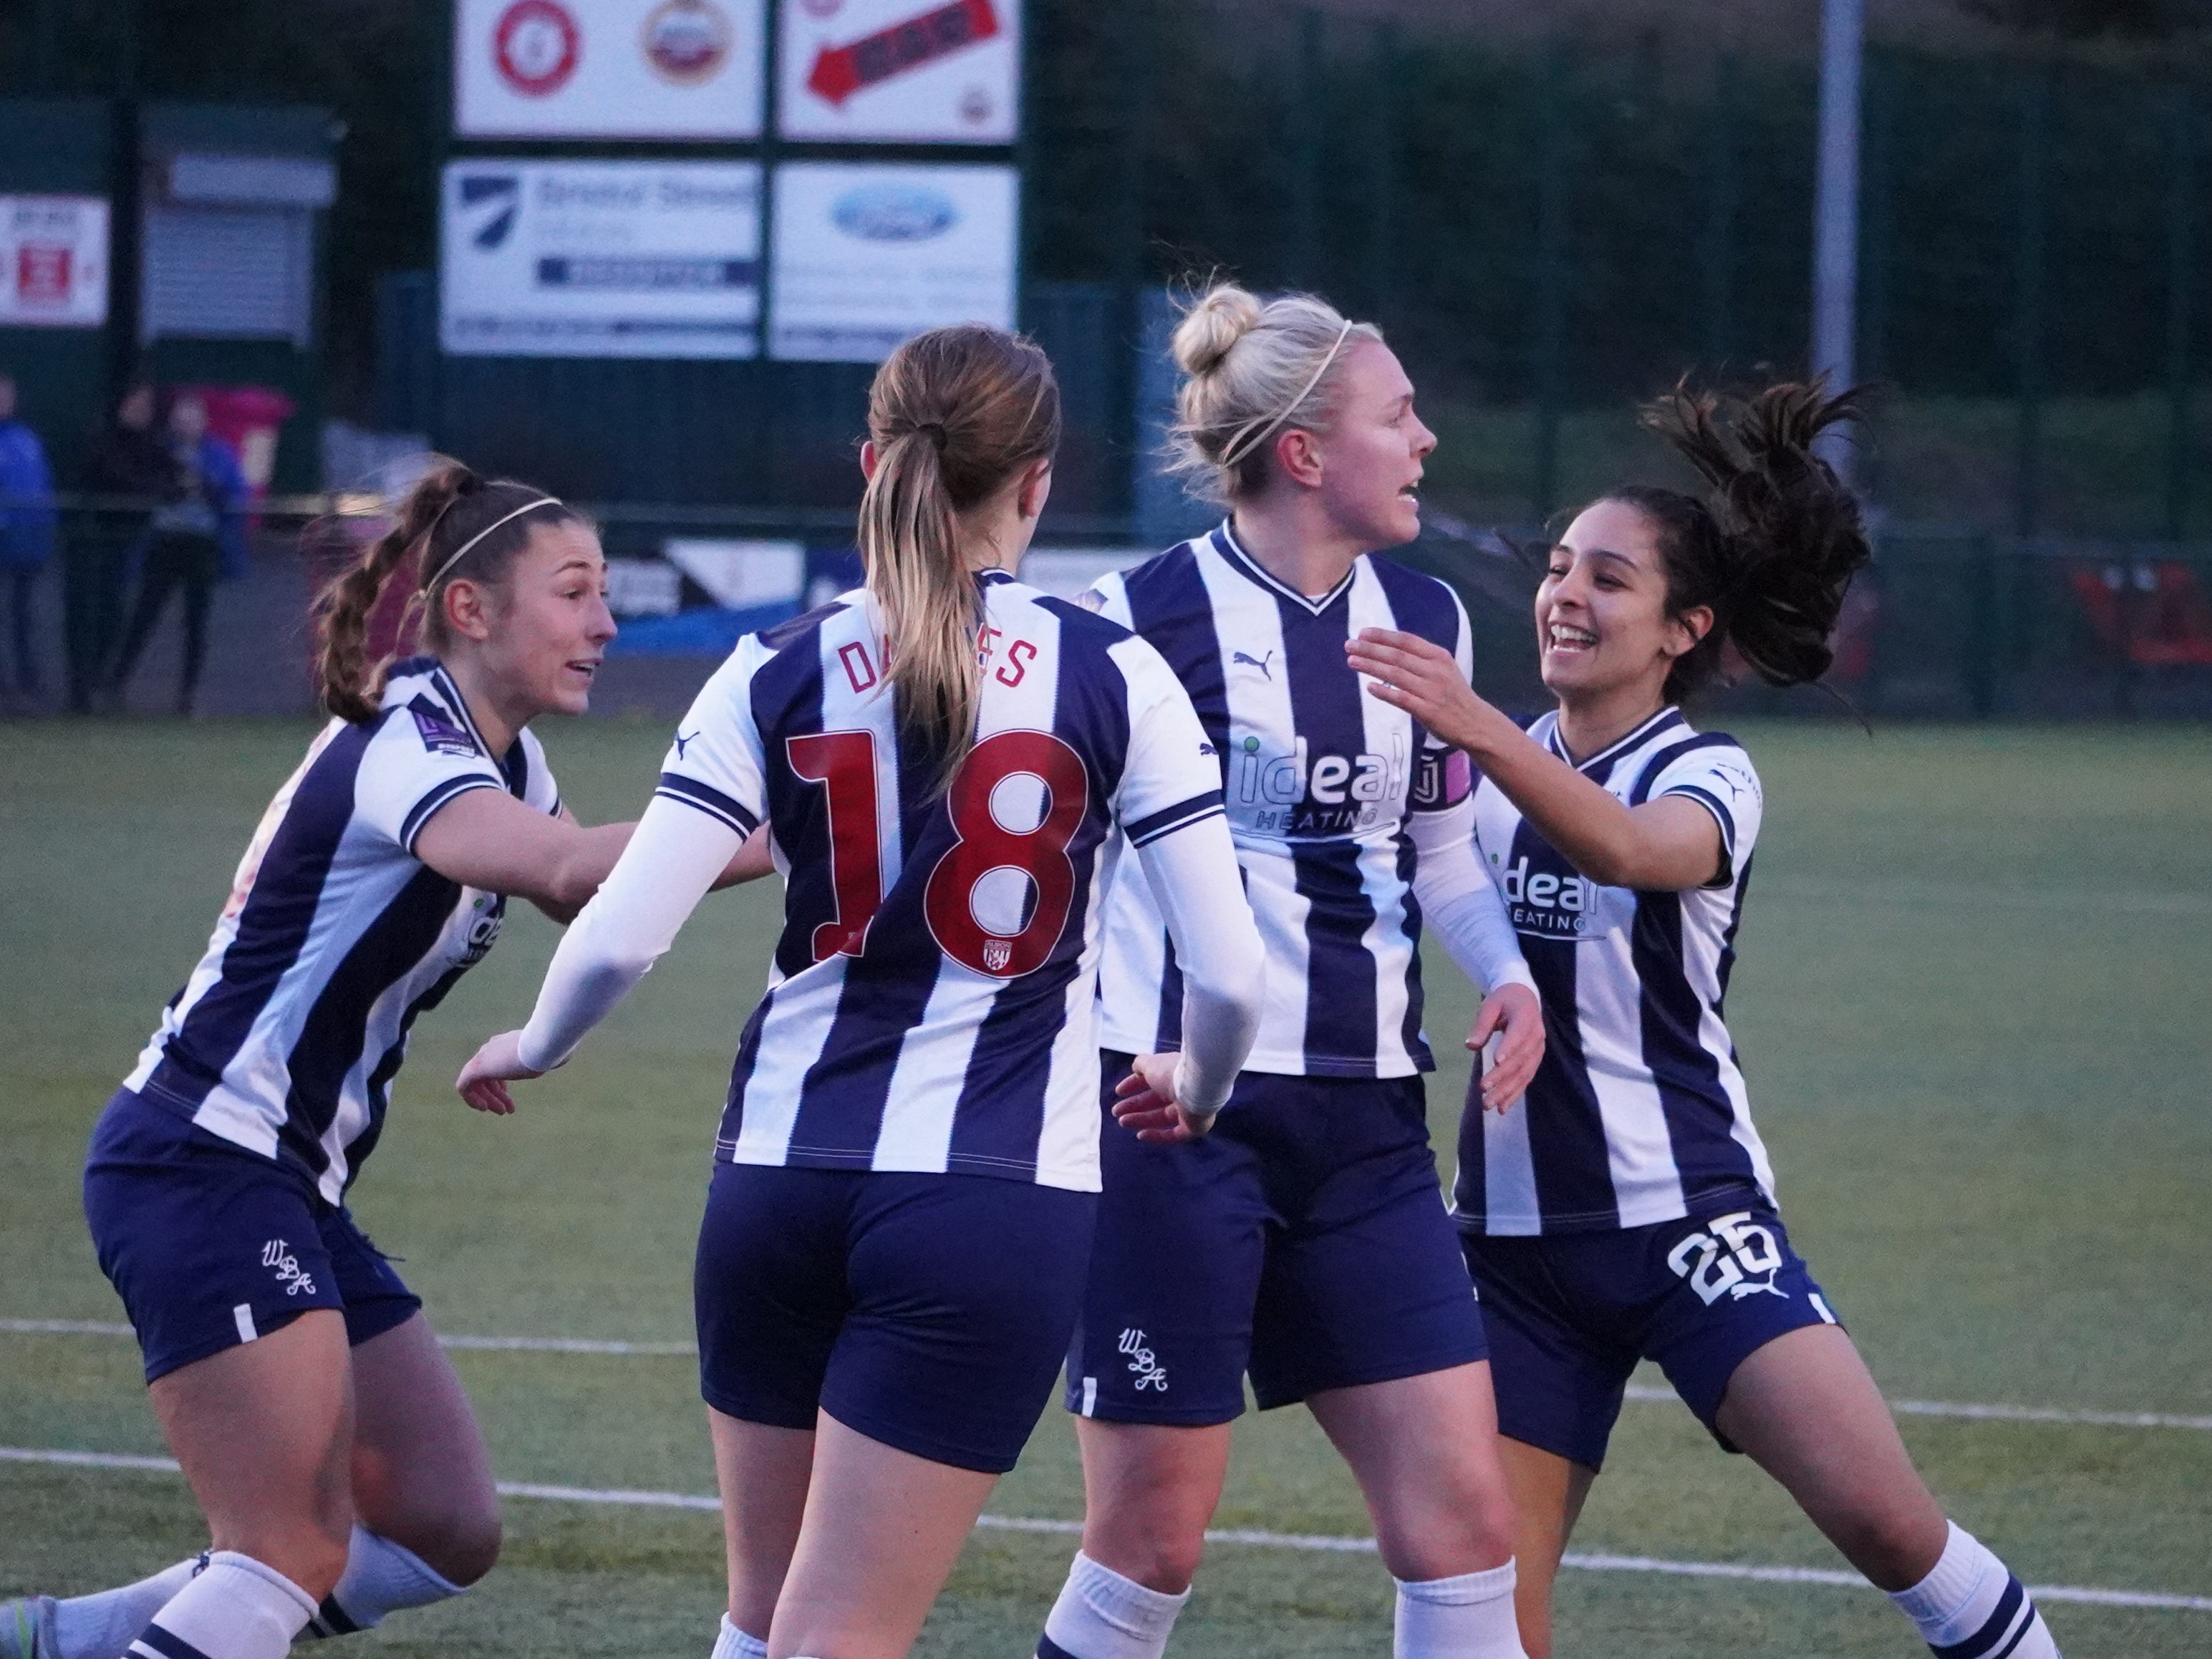 An image of the Albion Women team celebrating a goal against Leafield